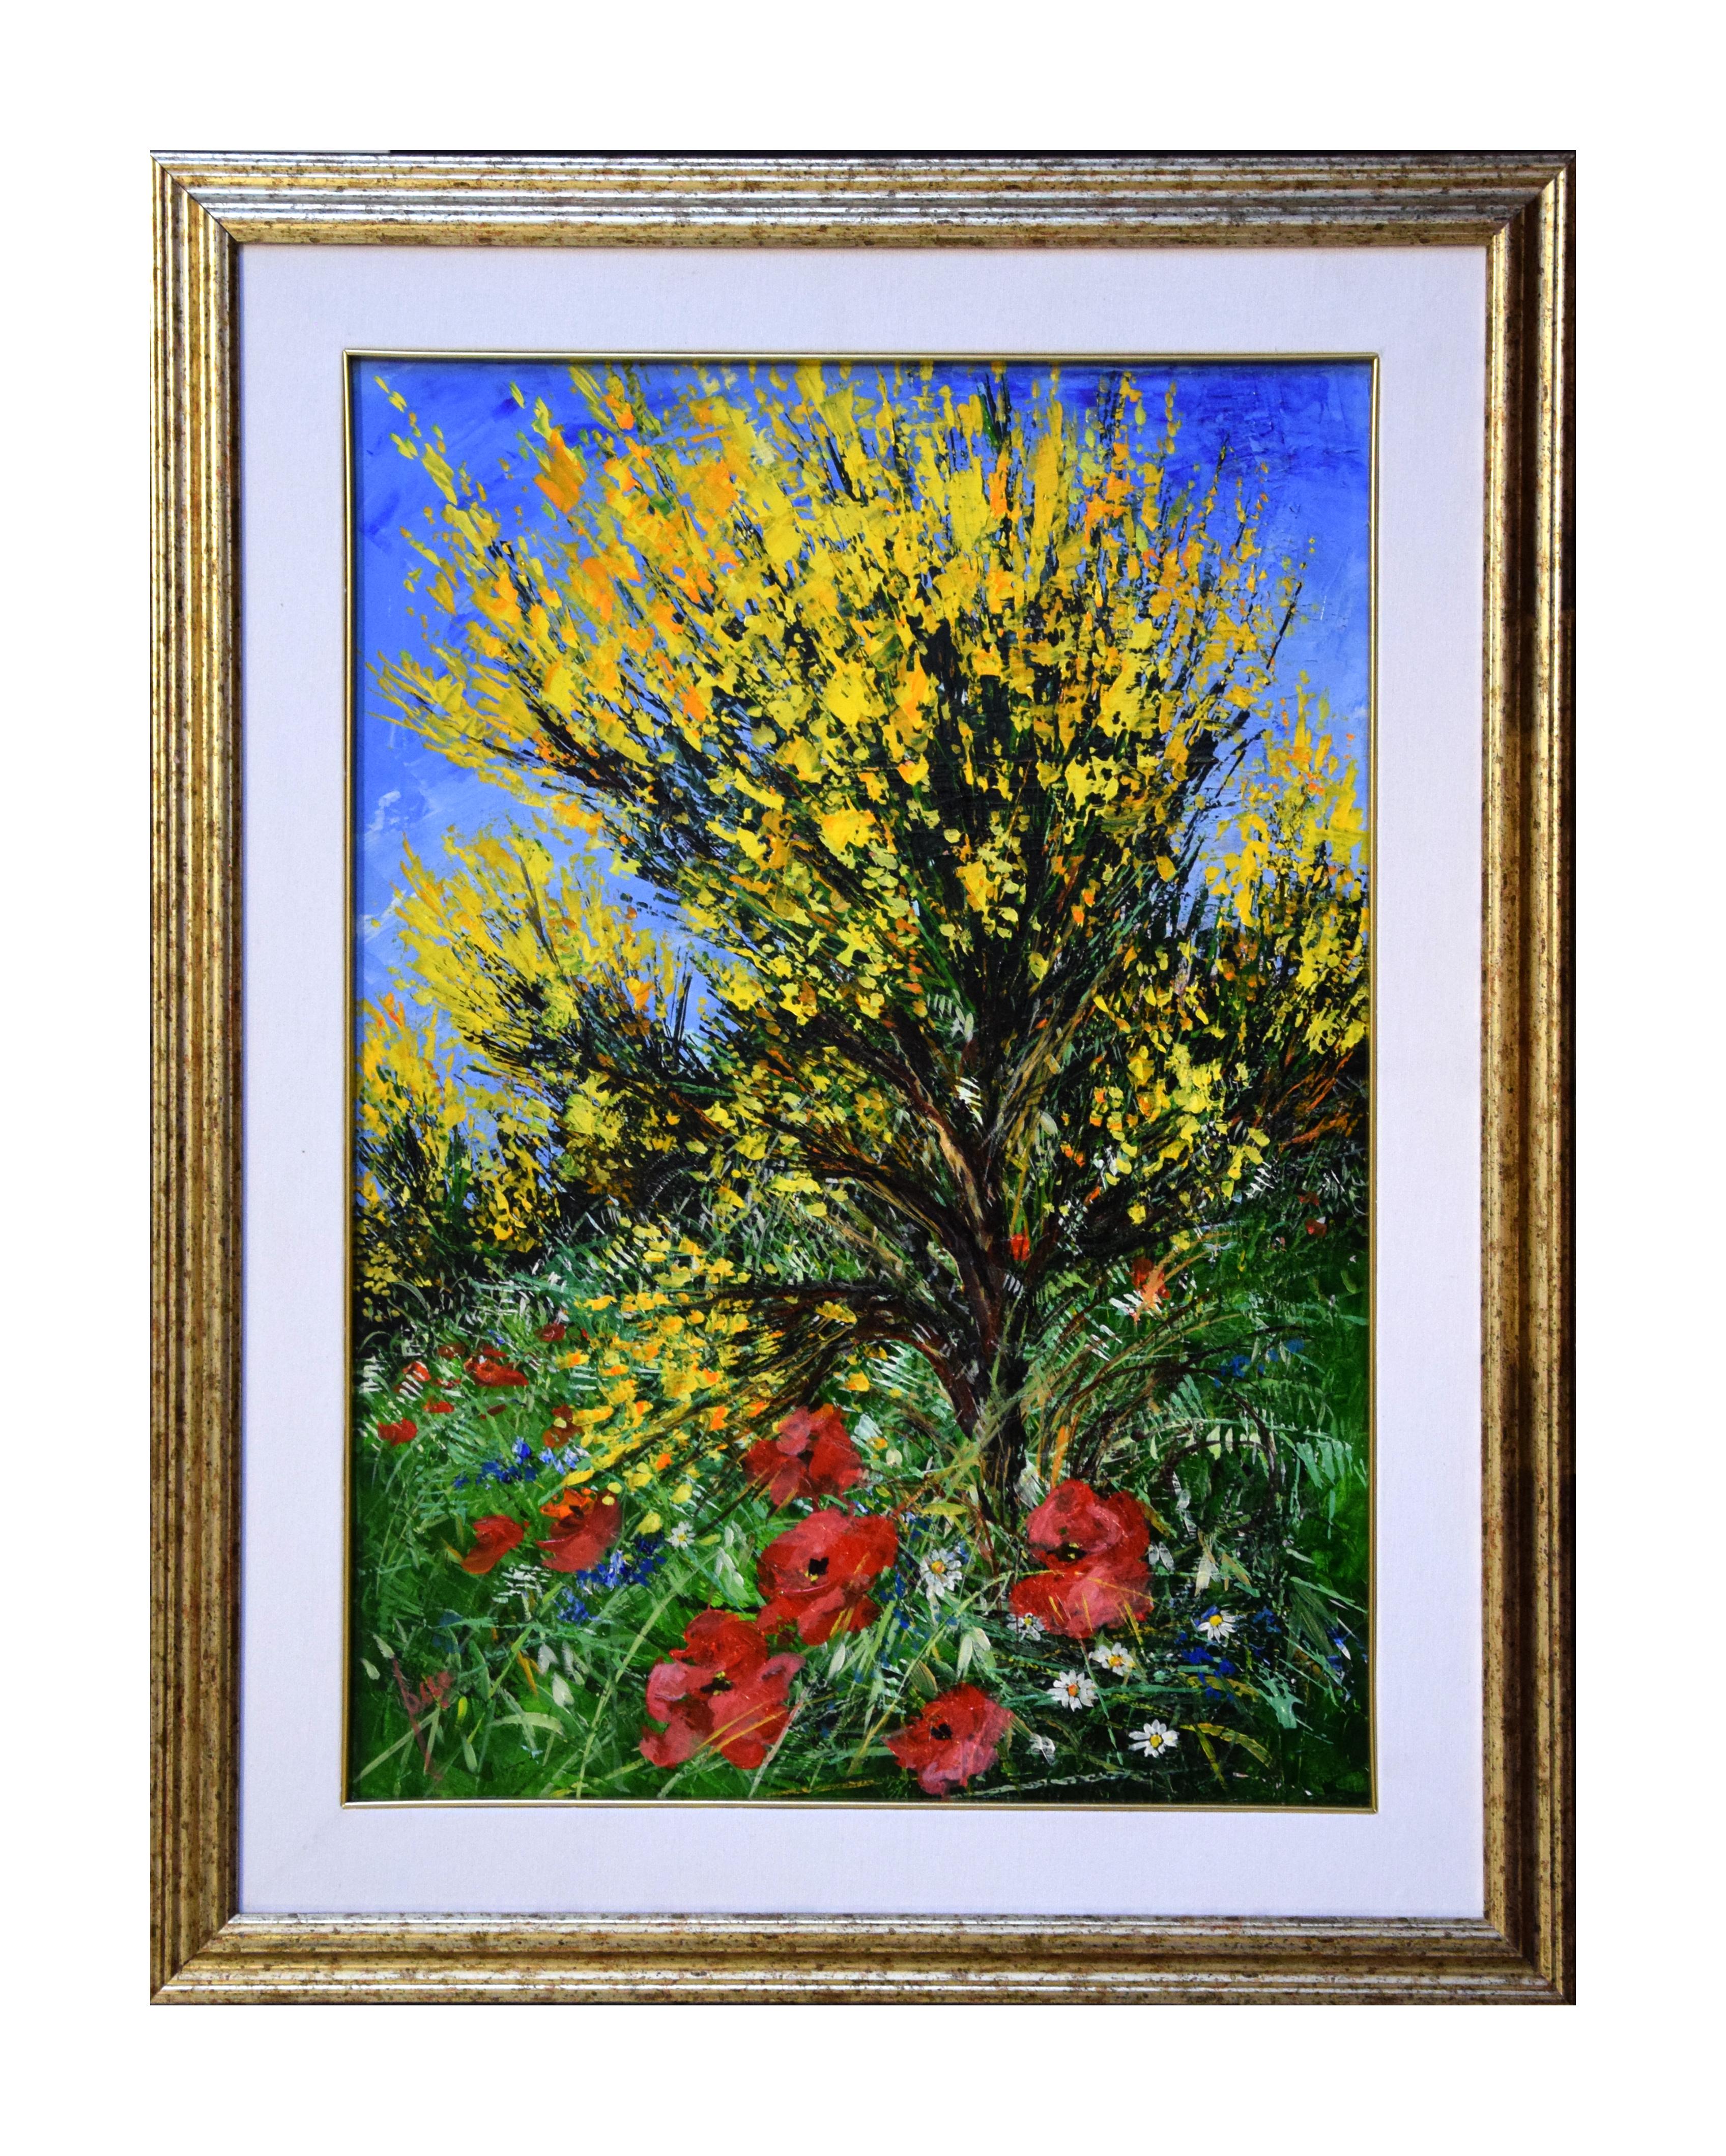 Ginestre is a very colorful oil painting on canvas realized by the Italian contemporary artist Luciano Sacco.

Including a frame (87.5 x 68 cm). Hand-signed by the artist on the lower left.

This beautiful oil painting represents yellow brooms in